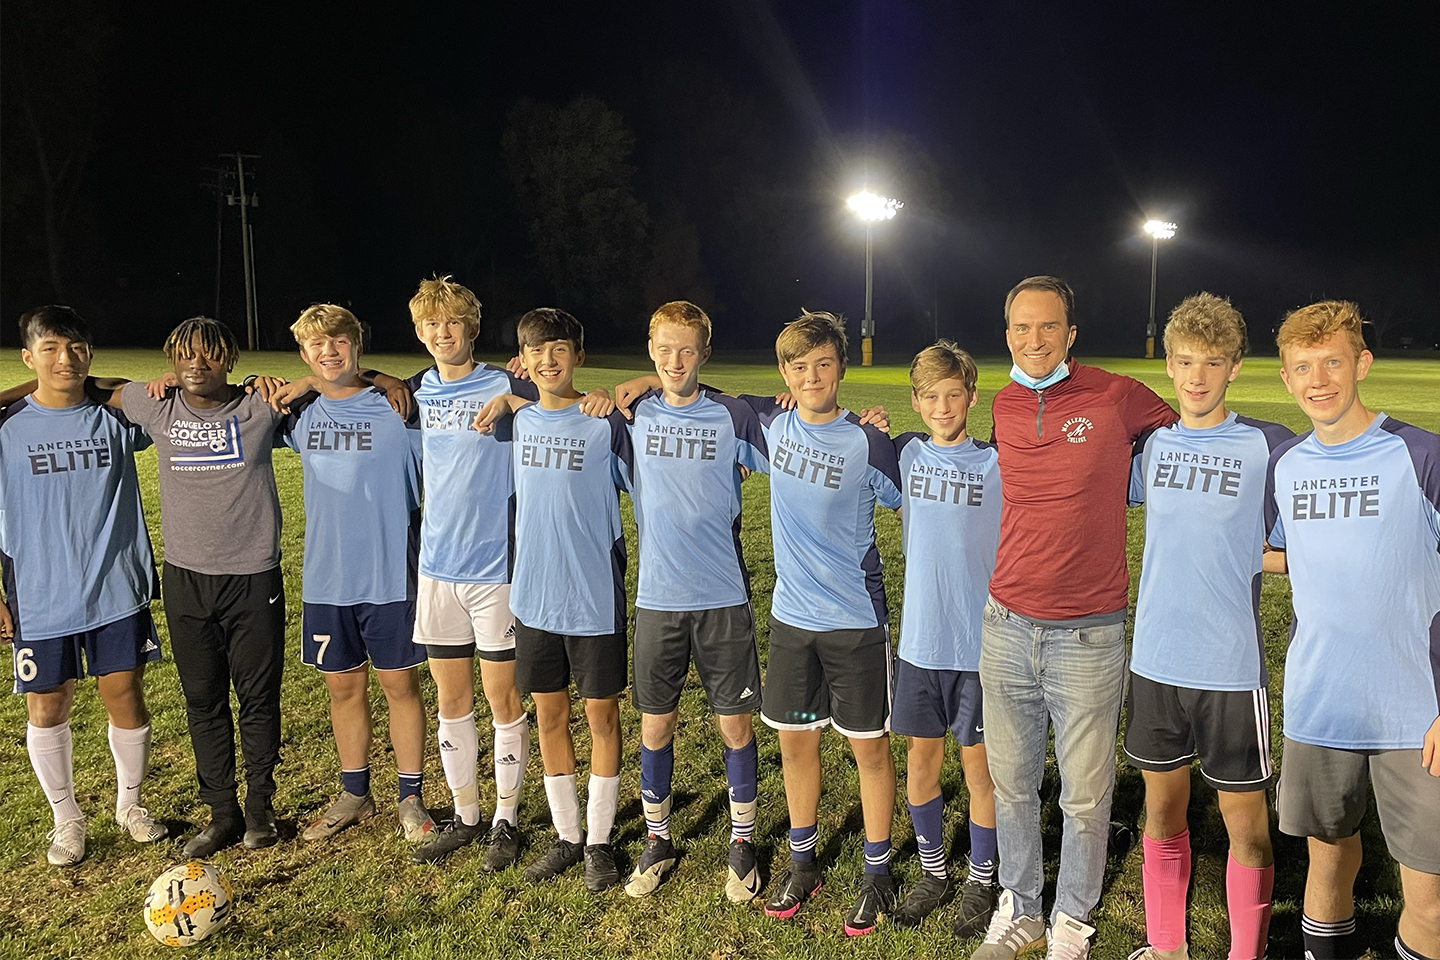 Dave Vassilaros ’03 (in red) with a soccer team he was coaching in November 2020